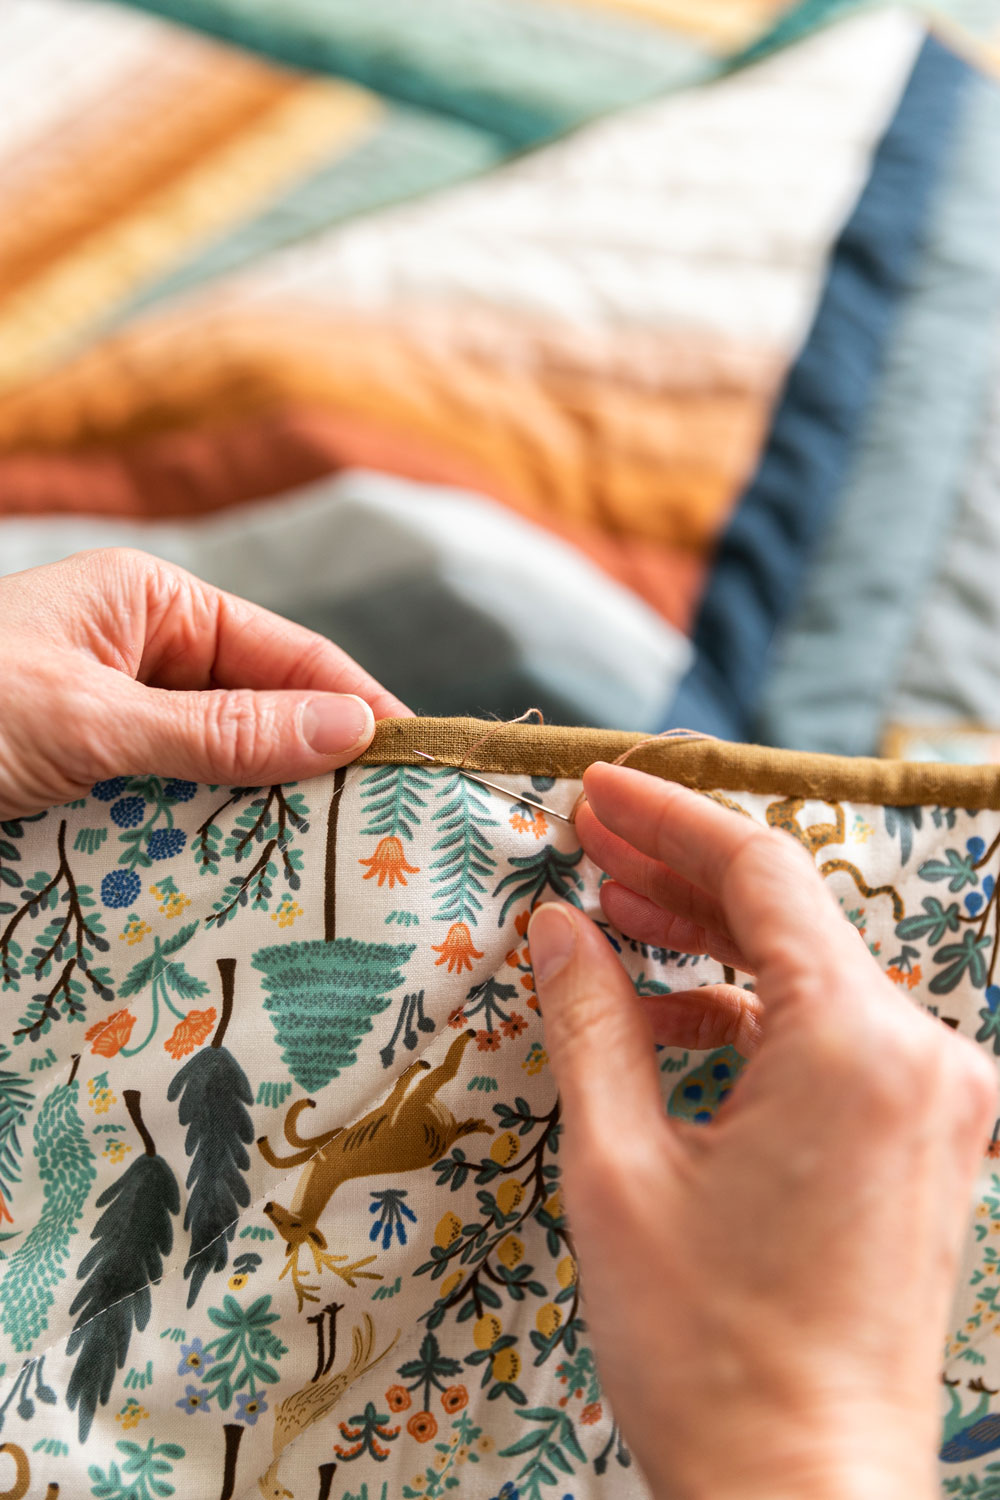 Prevent tangles, knots, and frays when hand sewing with thread conditioner. Learn how to use it and our favorites! suzyquilts.com #quilting #sewing